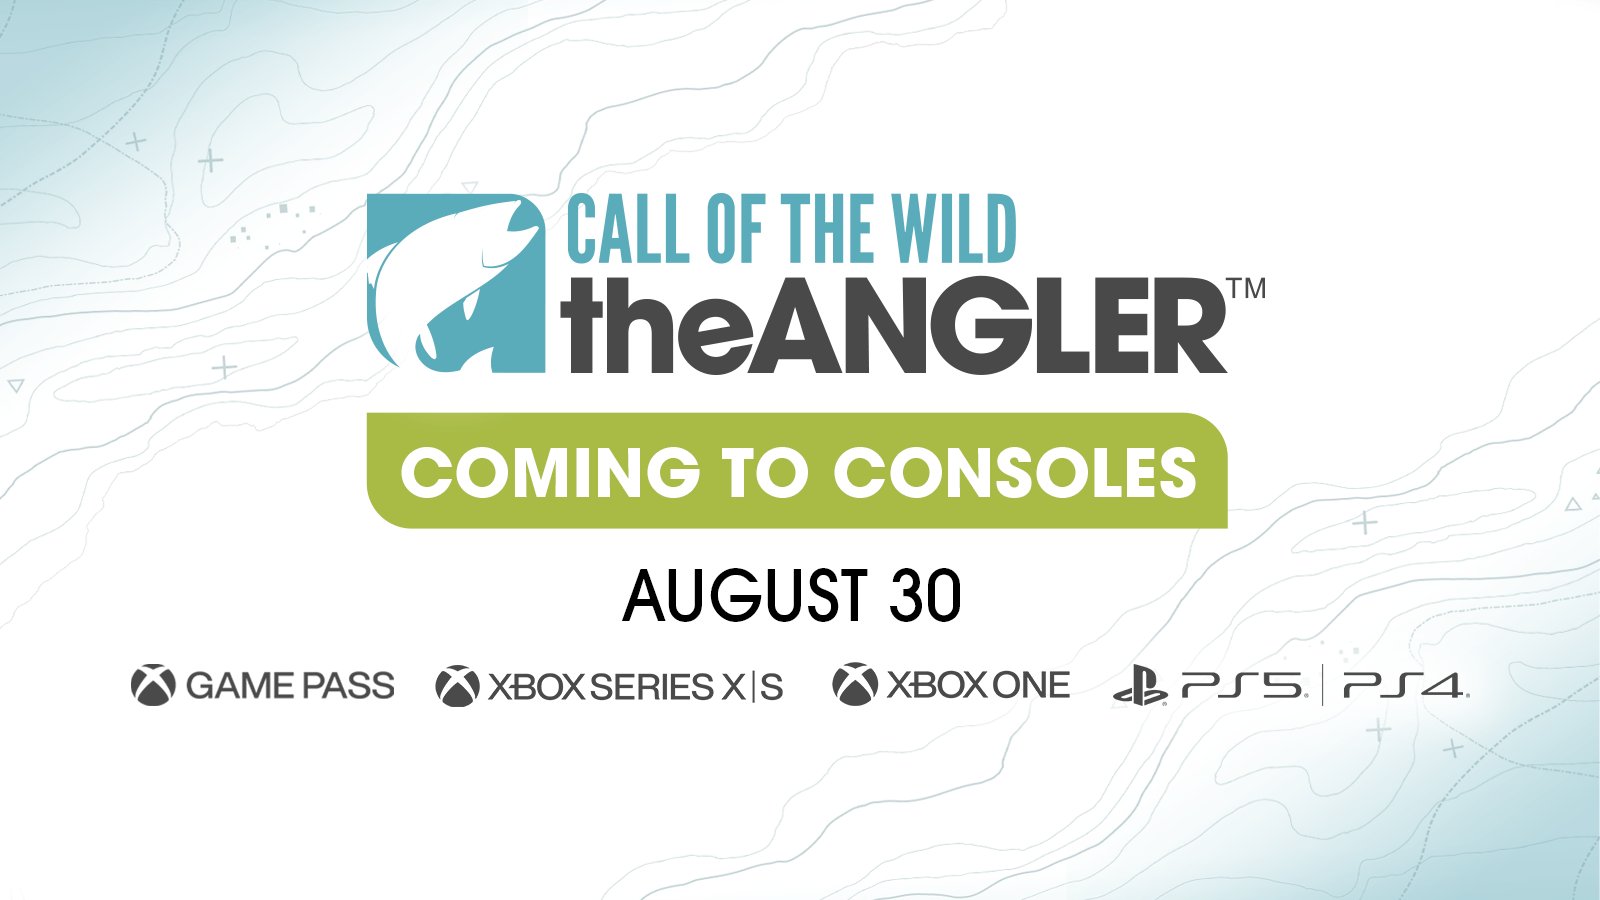 COTWTheAngler on X: 🚨 TOMORROW 🚨 You can play Call of the Wild